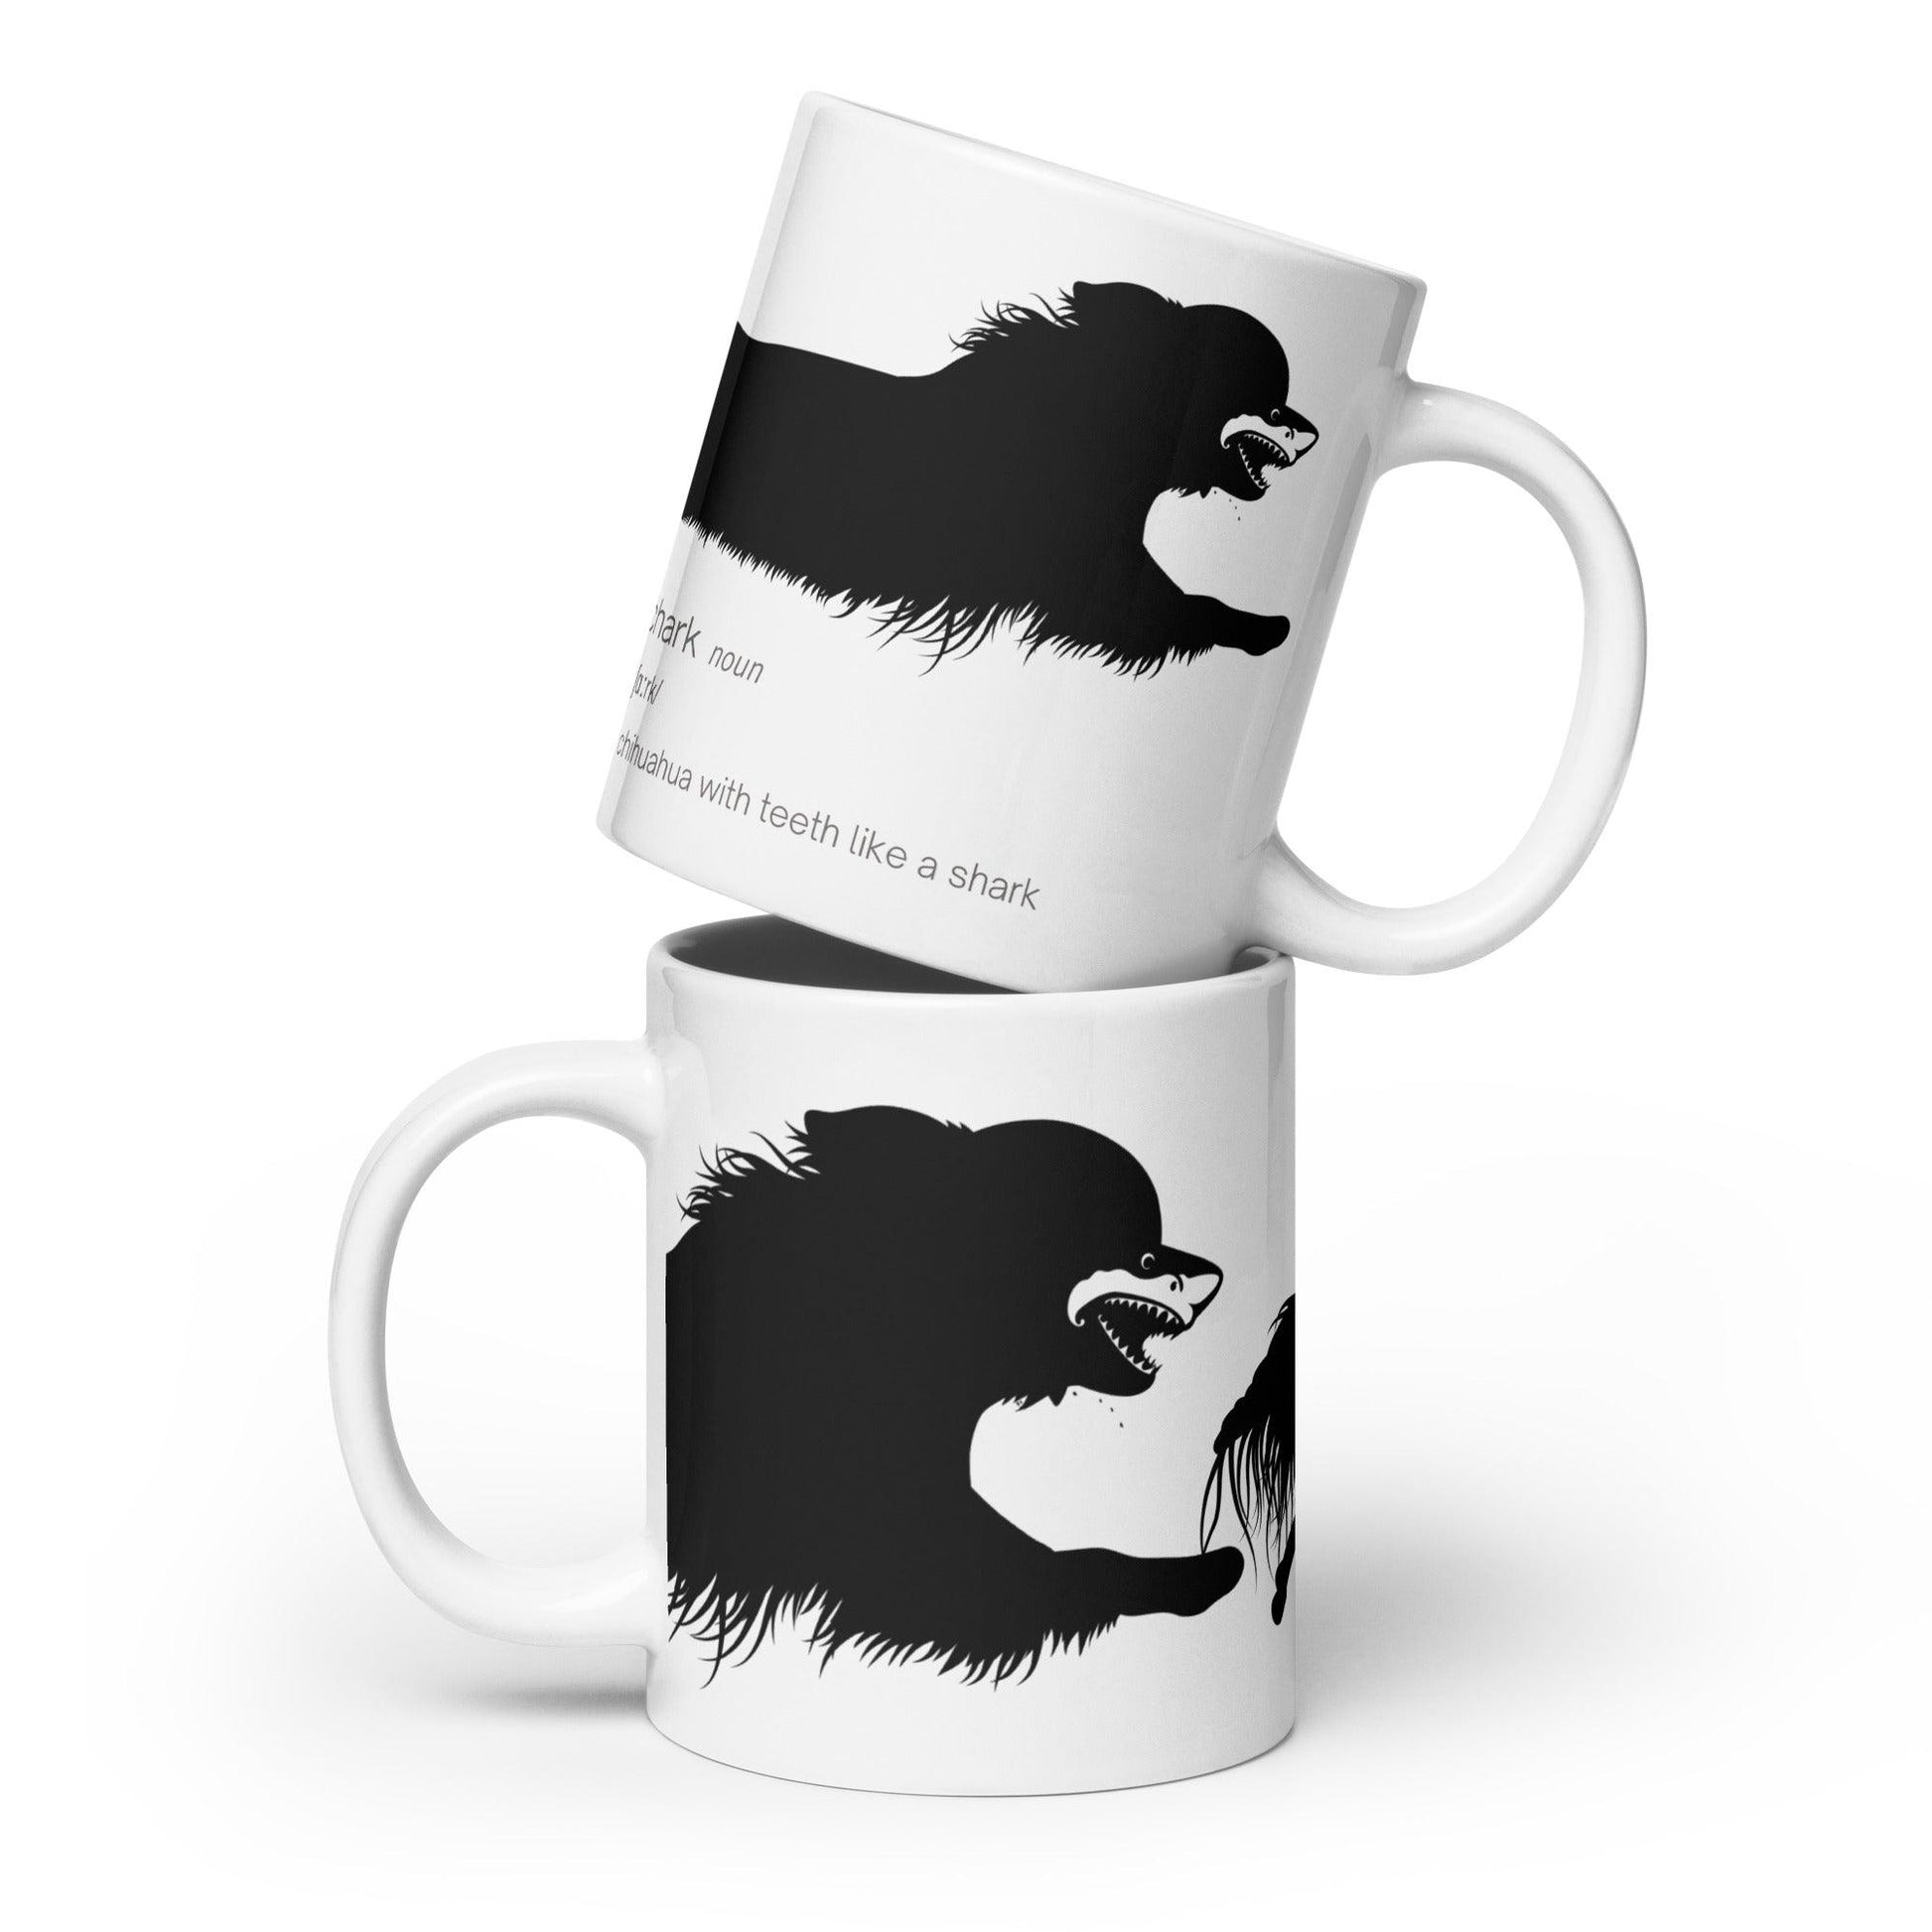 Chihuahua + Shark = Chark. Chihuahua mug features the black silhouette of a longhaired chihuahua with the face of a great white shark - mouth open to show off jaws lined with lots of sharp white teeth. Plus a "dictionary entry" of the noun "chark": a chihuahua with teeth like a shark. More on chimigos,com